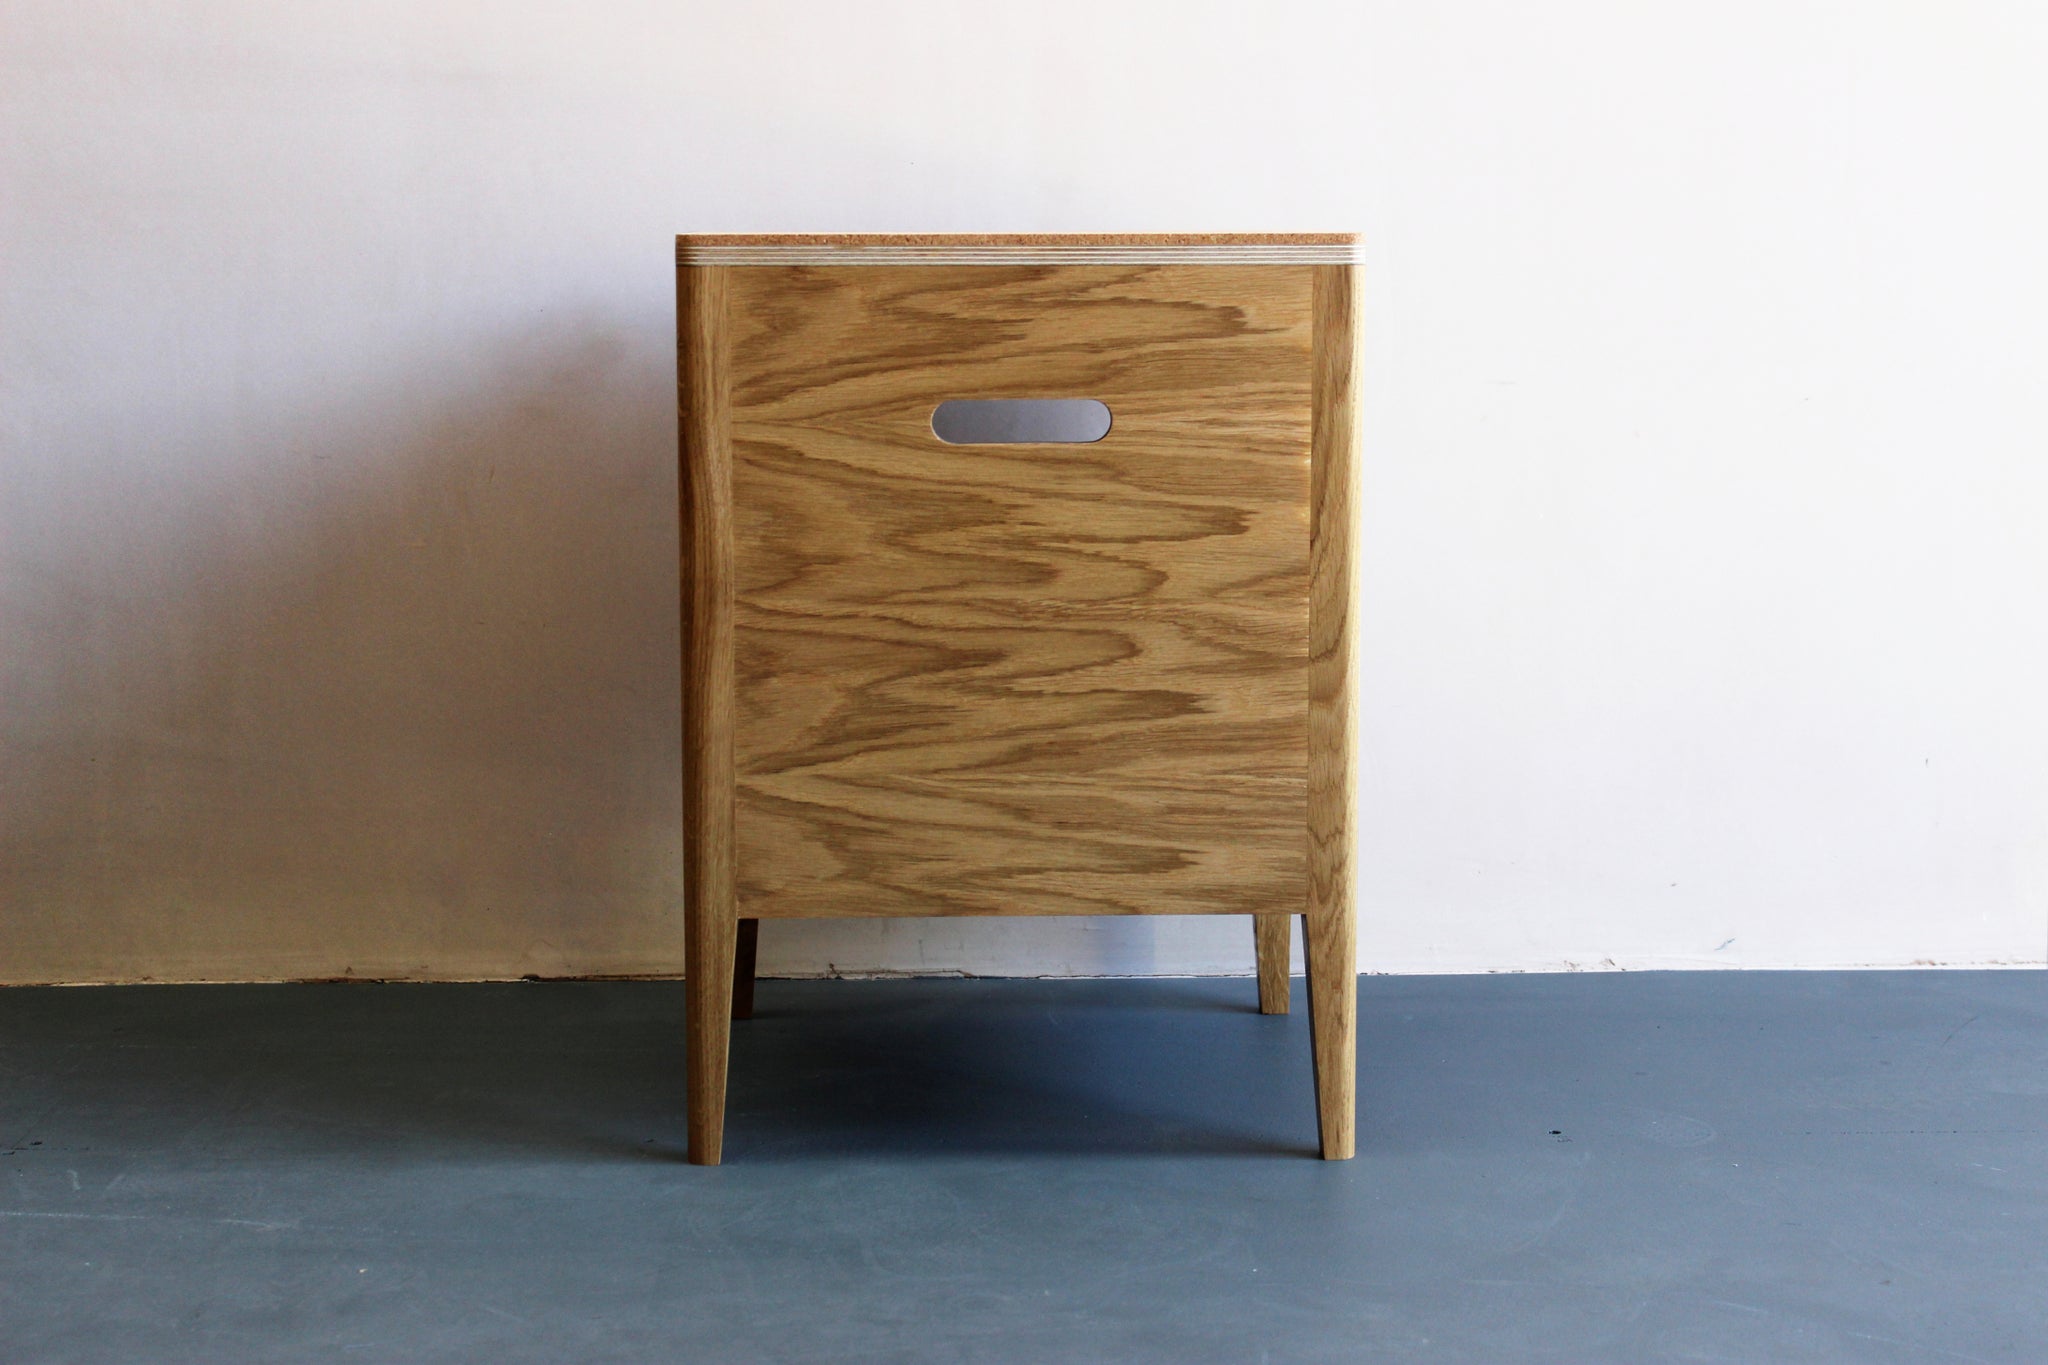 Handmade bedside table, perfect for a modern home. It features cork top with oak veneered plywood and solid oak legs. Made by Jon Grant London in Leyton, East London.